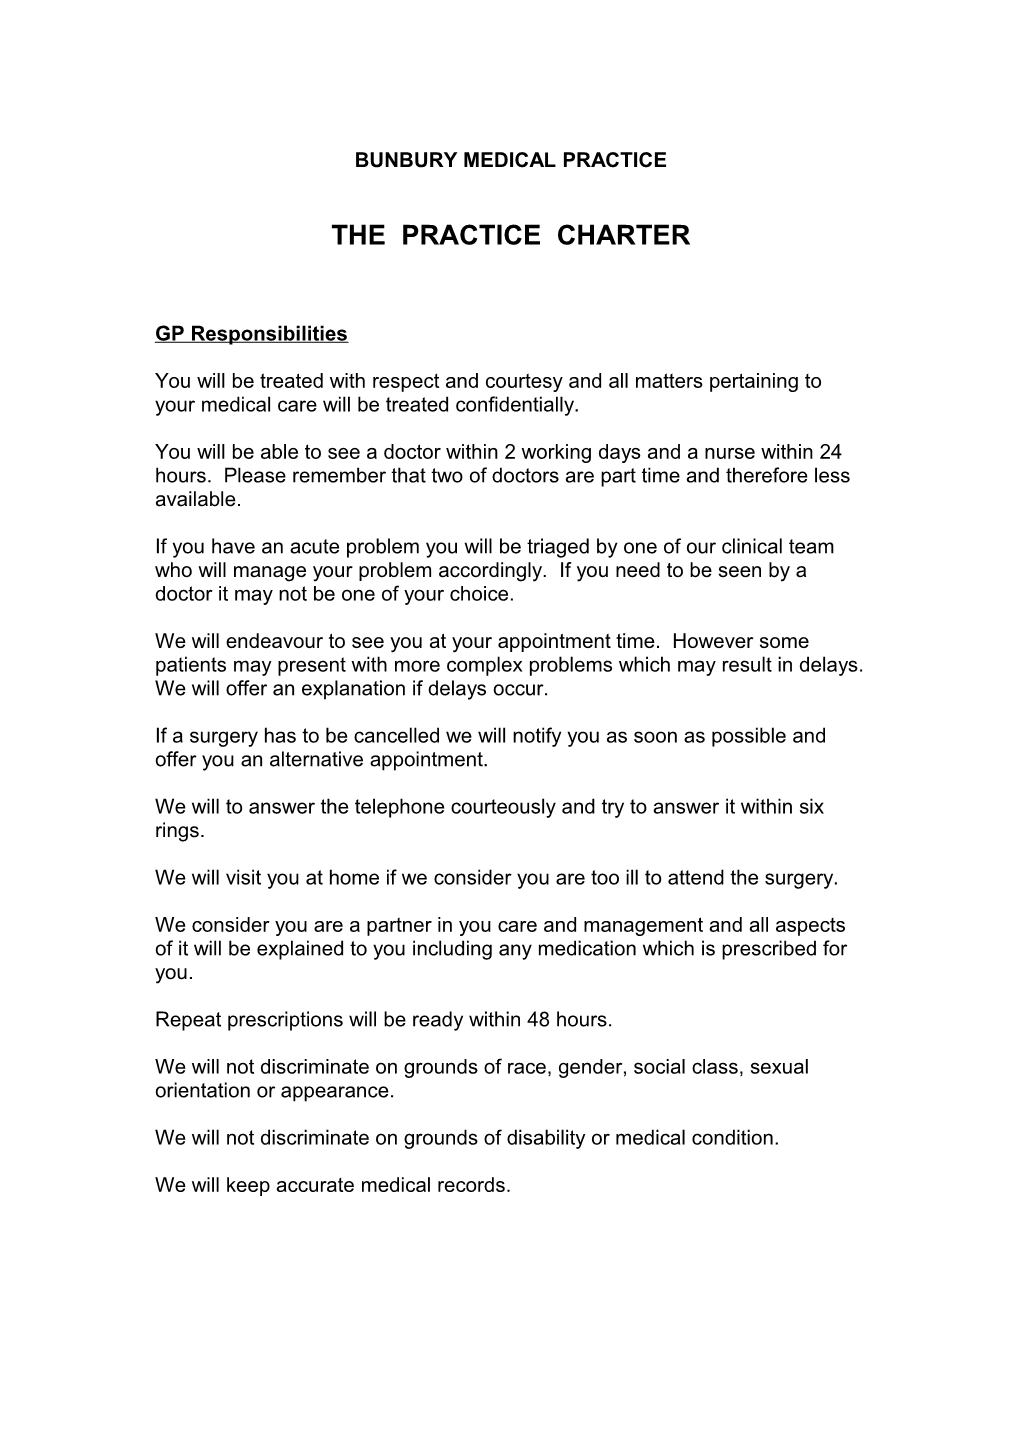 The Practice Charter